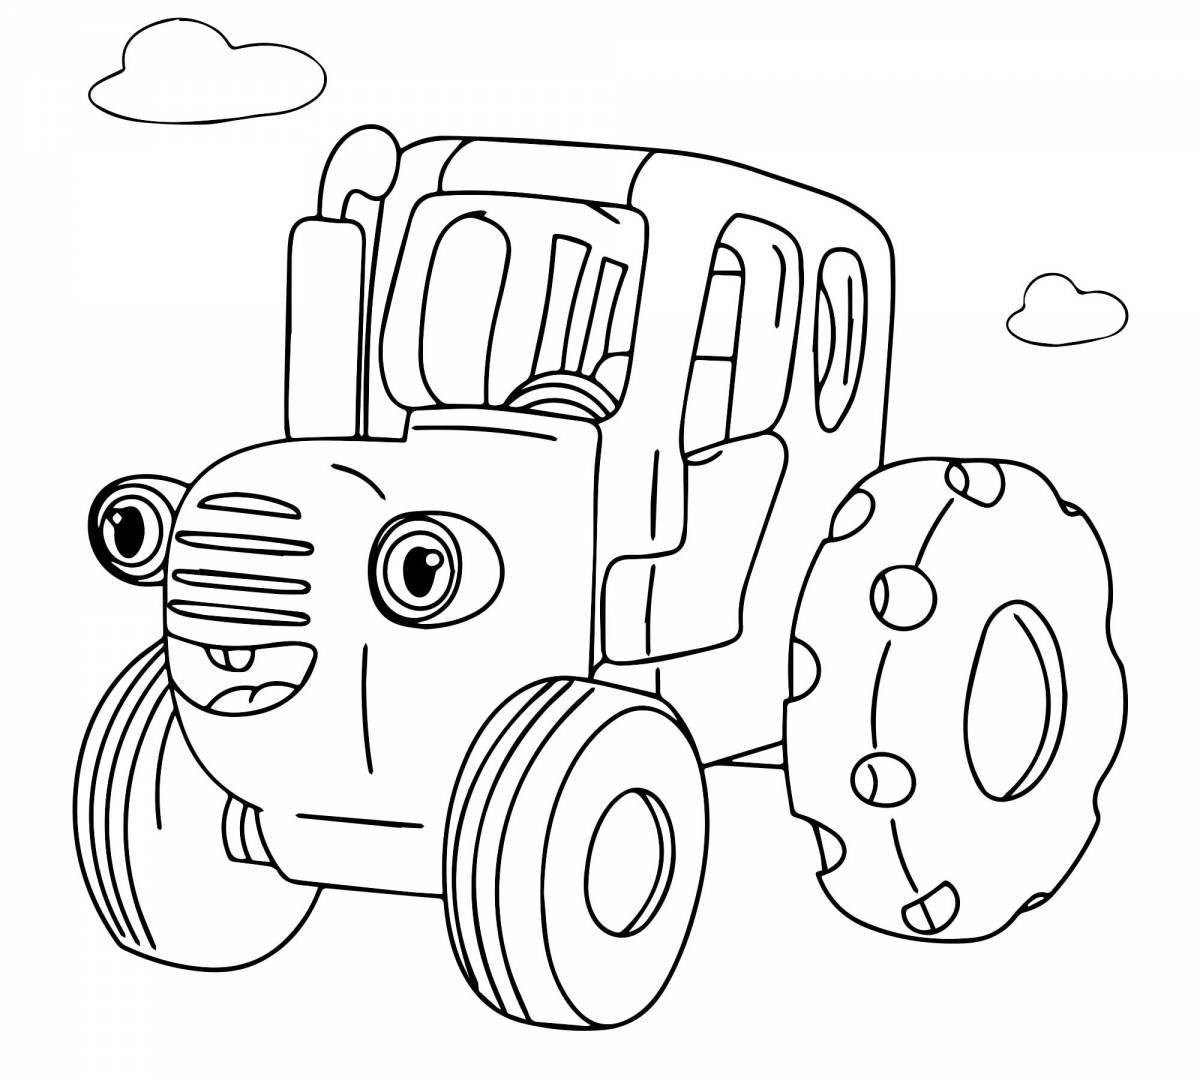 Coloring page brave blue tractor